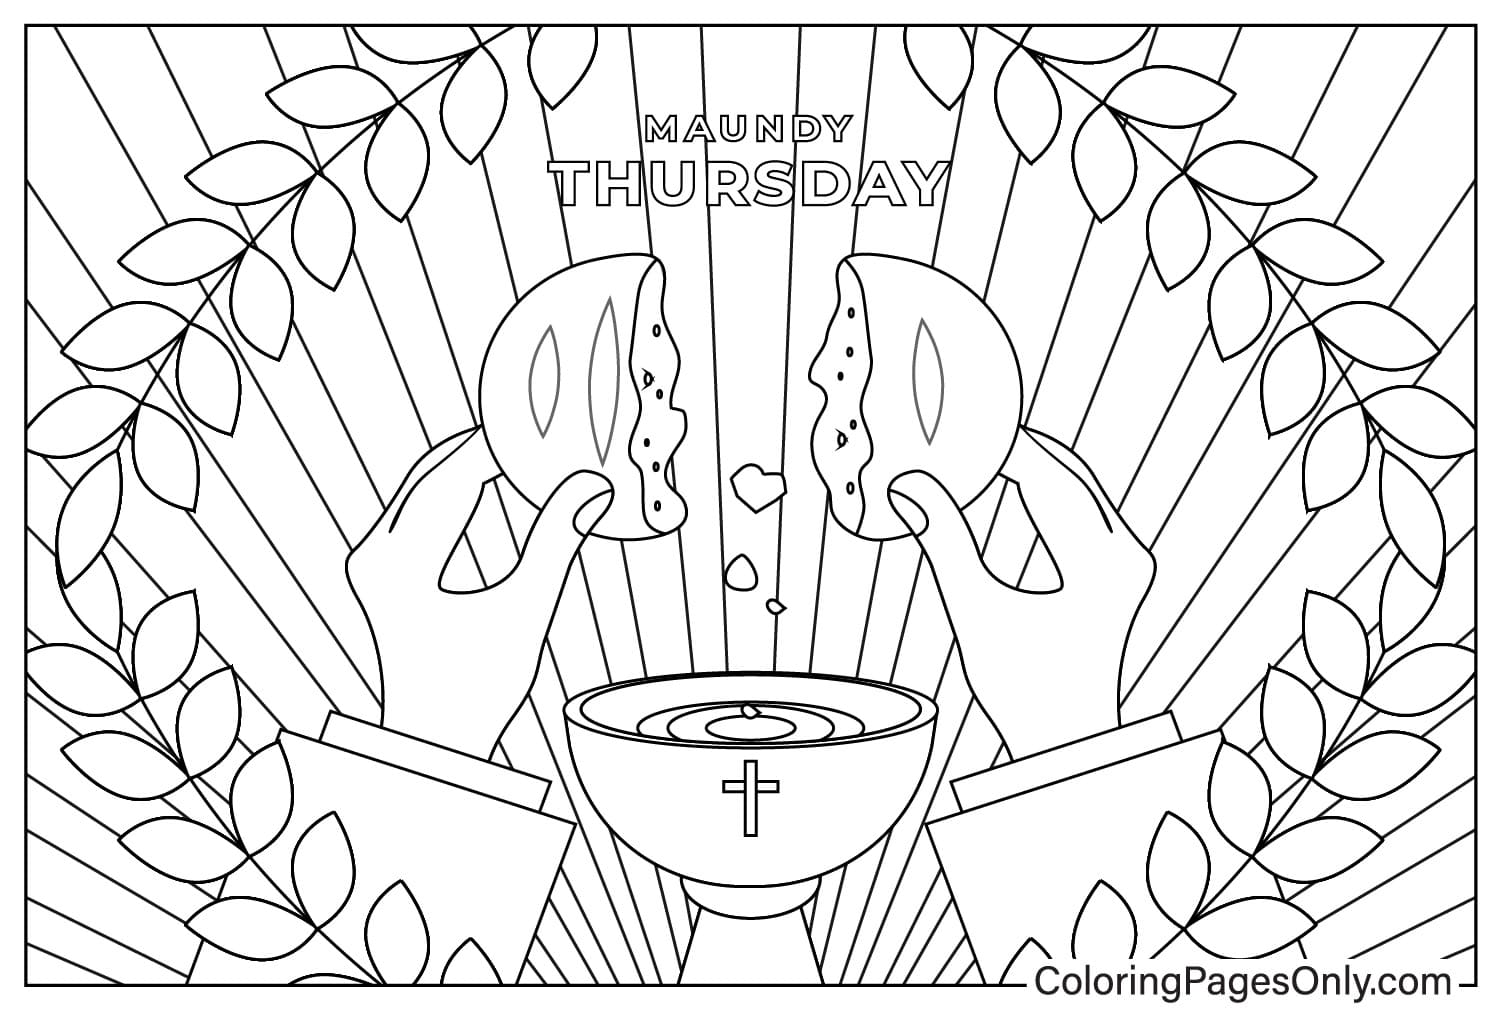 Maundy Thursday Coloring Page - Free Printable Coloring Pages